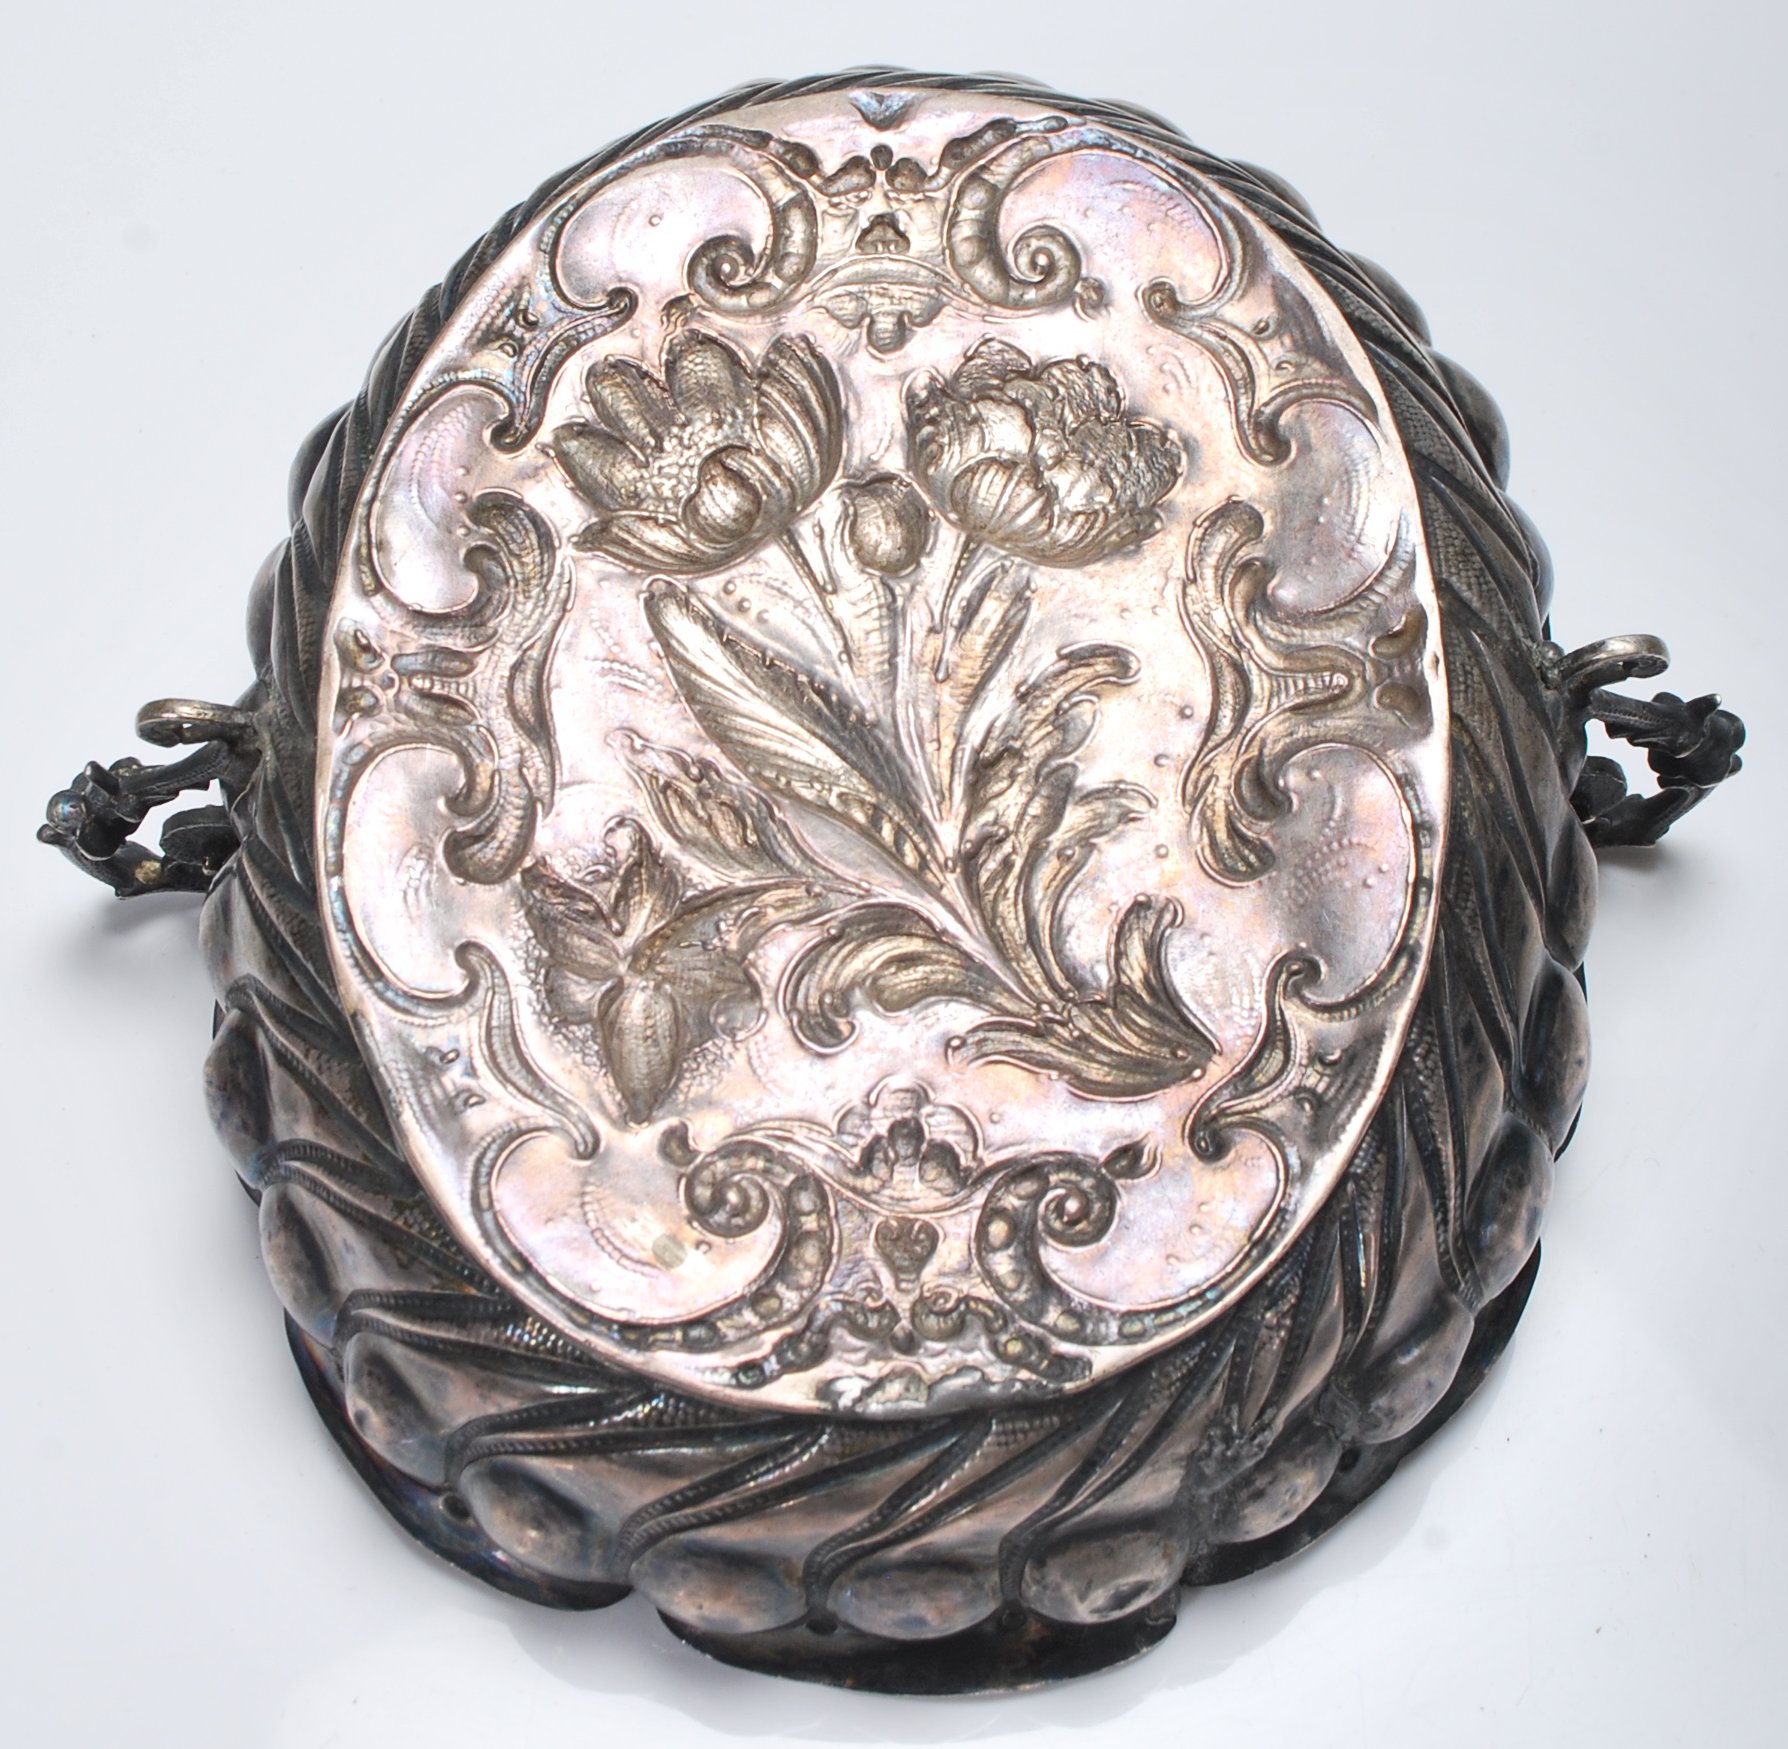 ANTIQUE SILVER TWIN HANDLED FLORAL DISH - Image 5 of 6